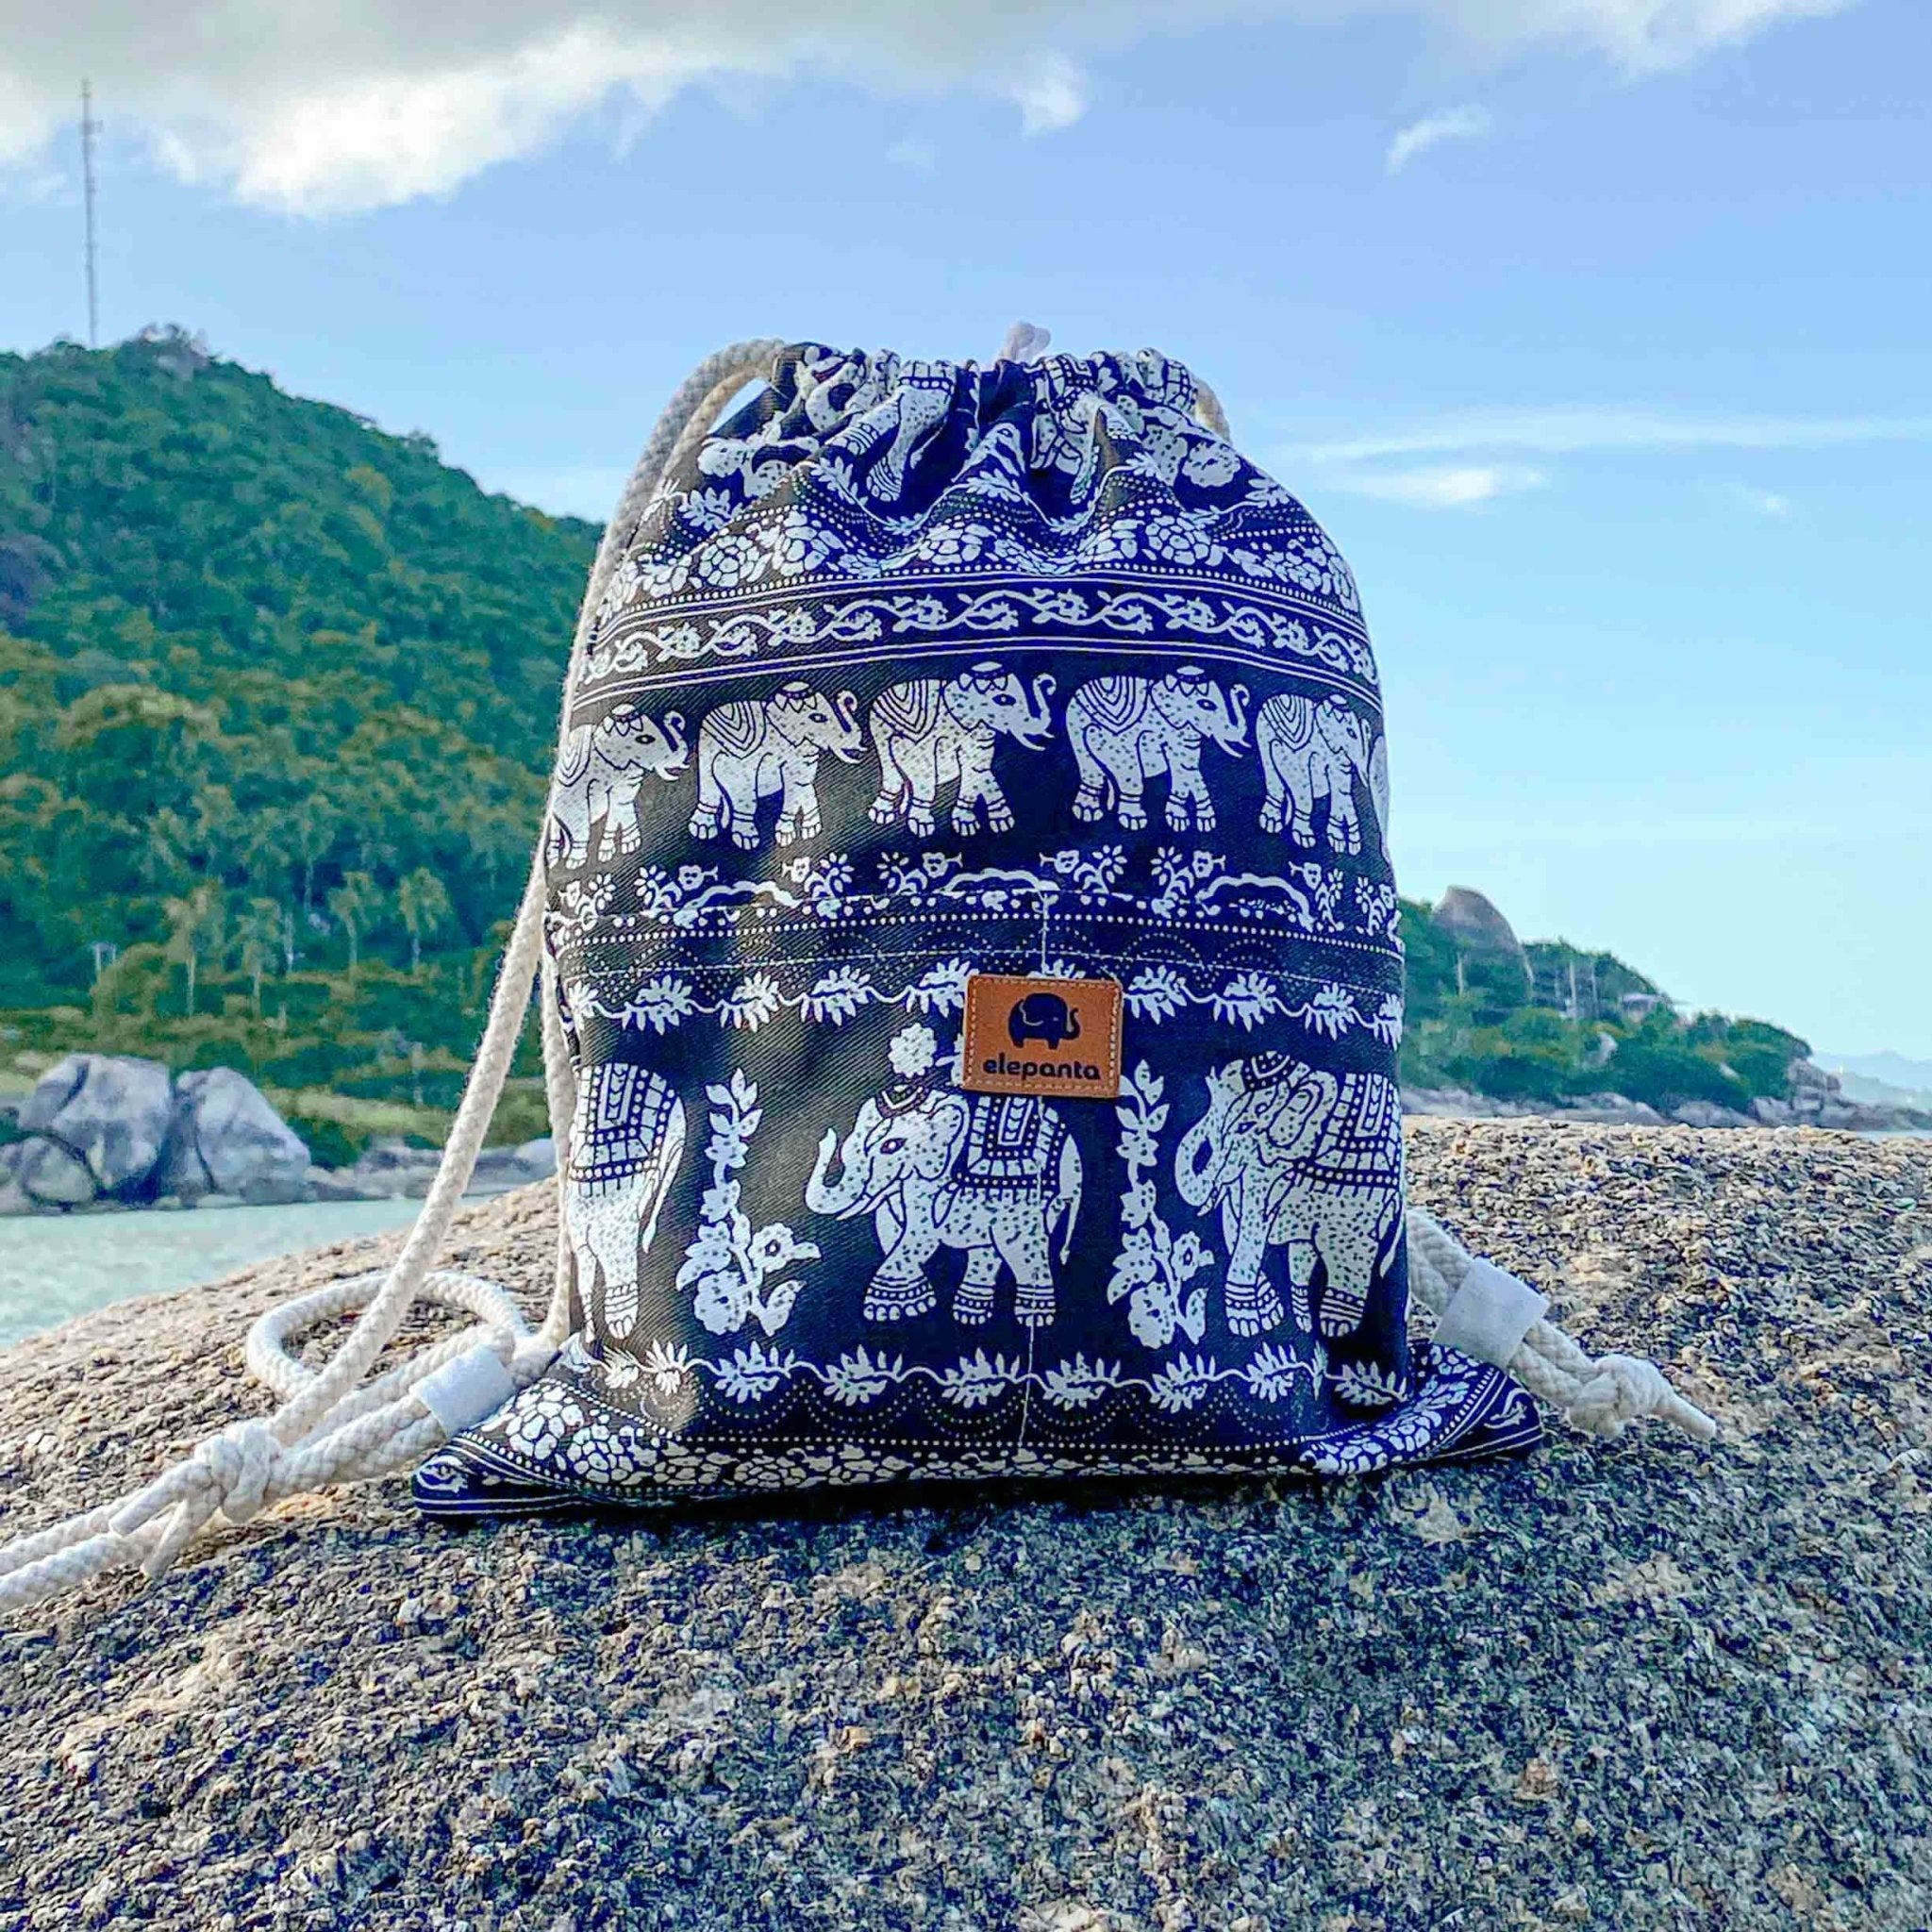 KRABI DRAWSTRING BACKPACK Elepanta Backpacks - Buy Today Elephant Pants Jewelry And Bohemian Clothes Handmade In Thailand Help To Save The Elephants FairTrade And Vegan